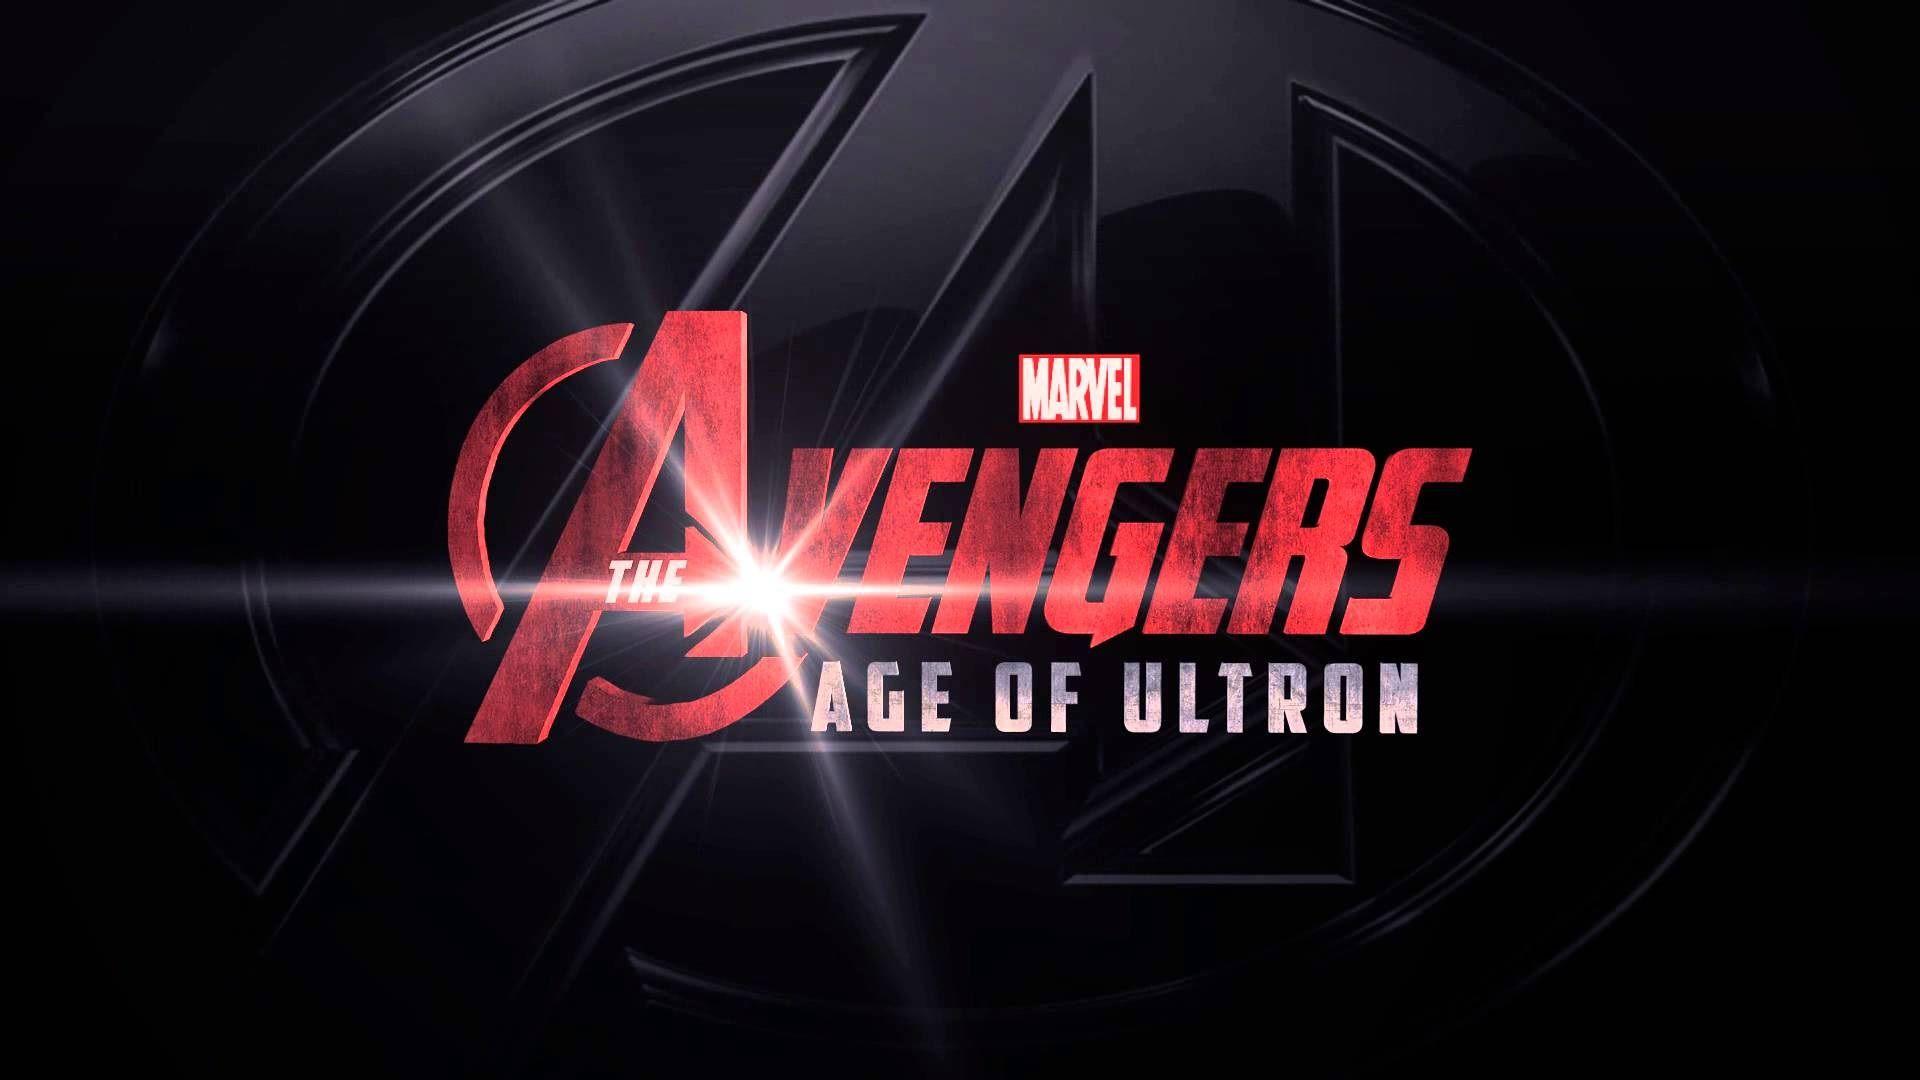 Avengers Age of Ultron wallpapers 37